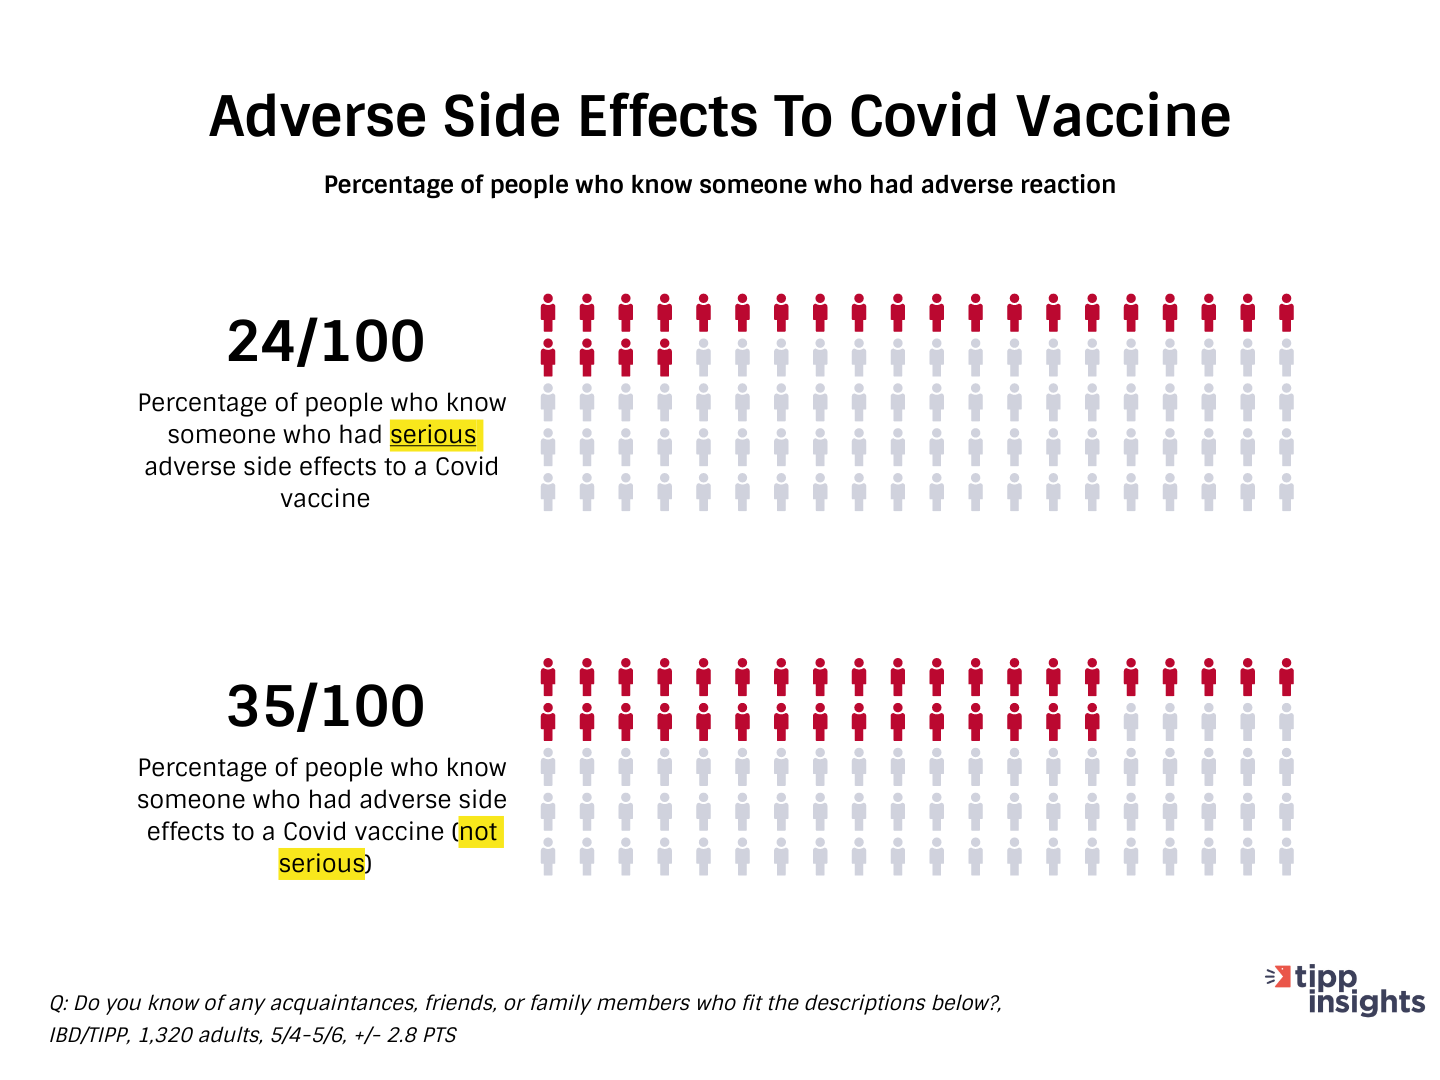 IBD/TIPP Poll Results How many americans know of aquaintances friends or family who experienced side effects to Covid19 vaccine